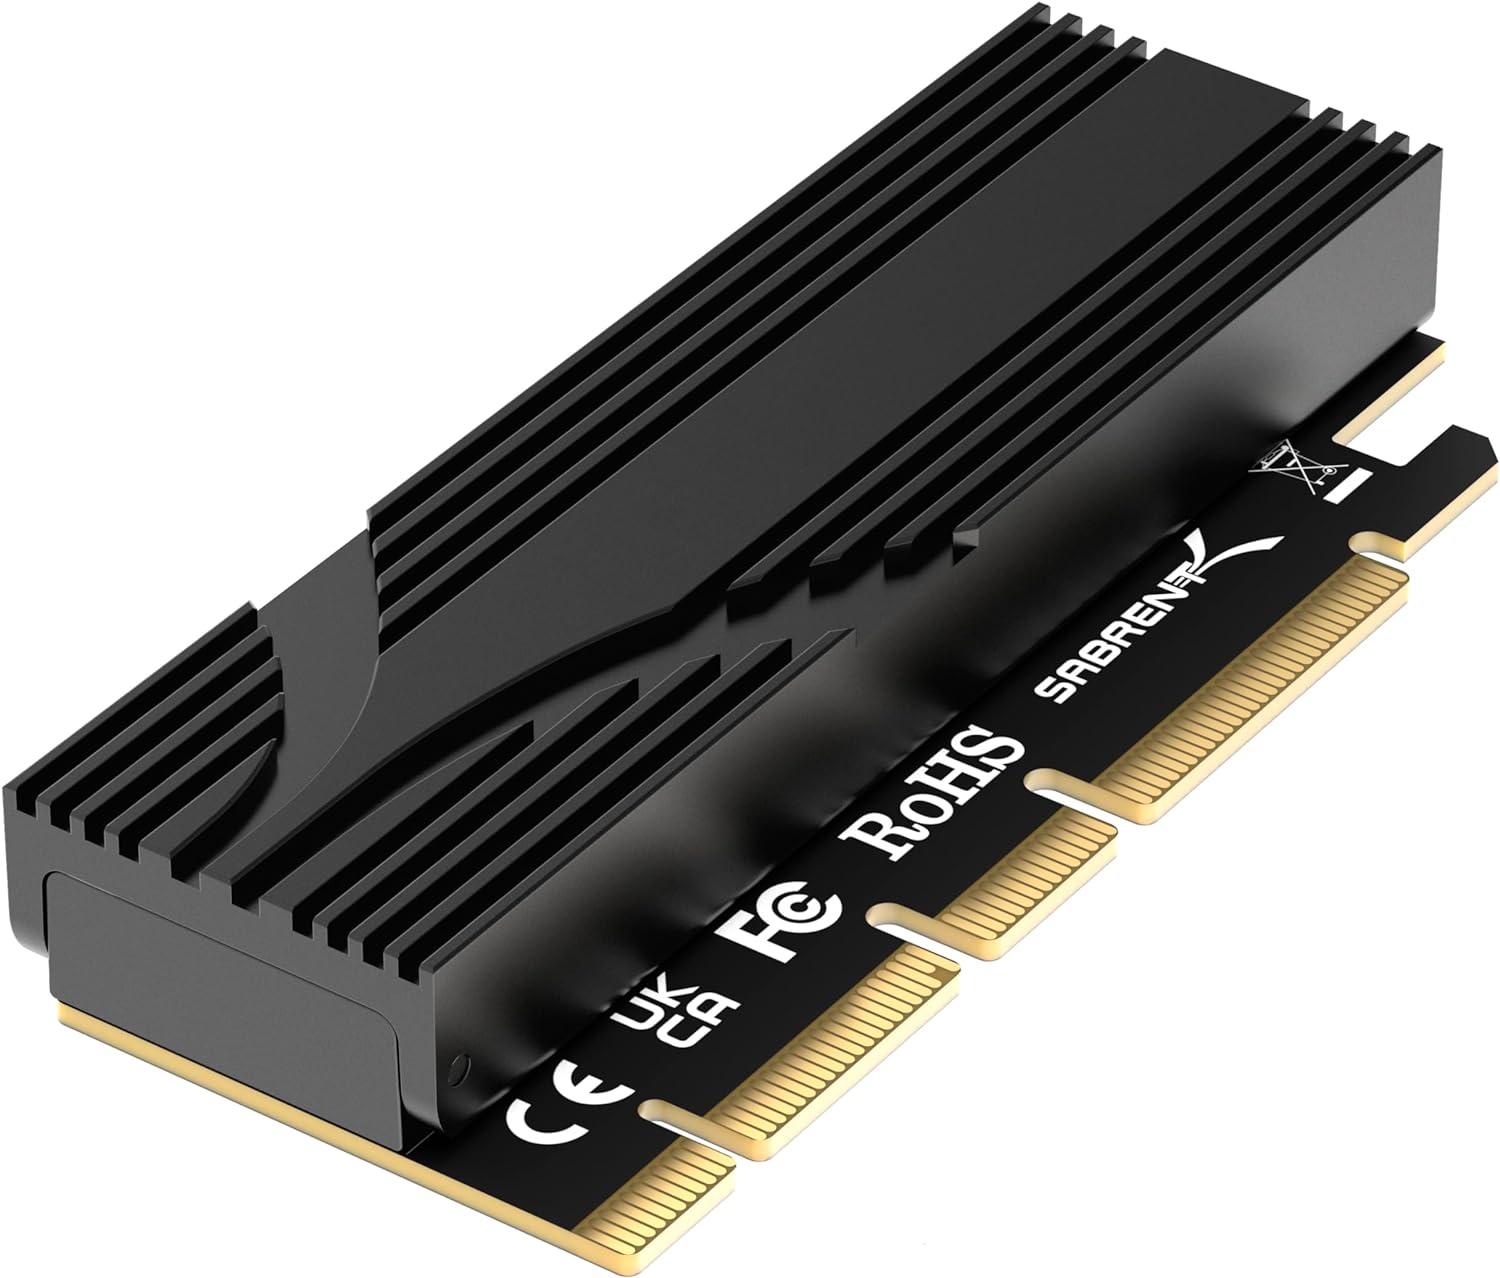 Sabrent NVMe M.2 SSD to PCIe X16/X8/X4 Adapter Card w/ Aluminum Heat Sink $13.90 & More $13.91